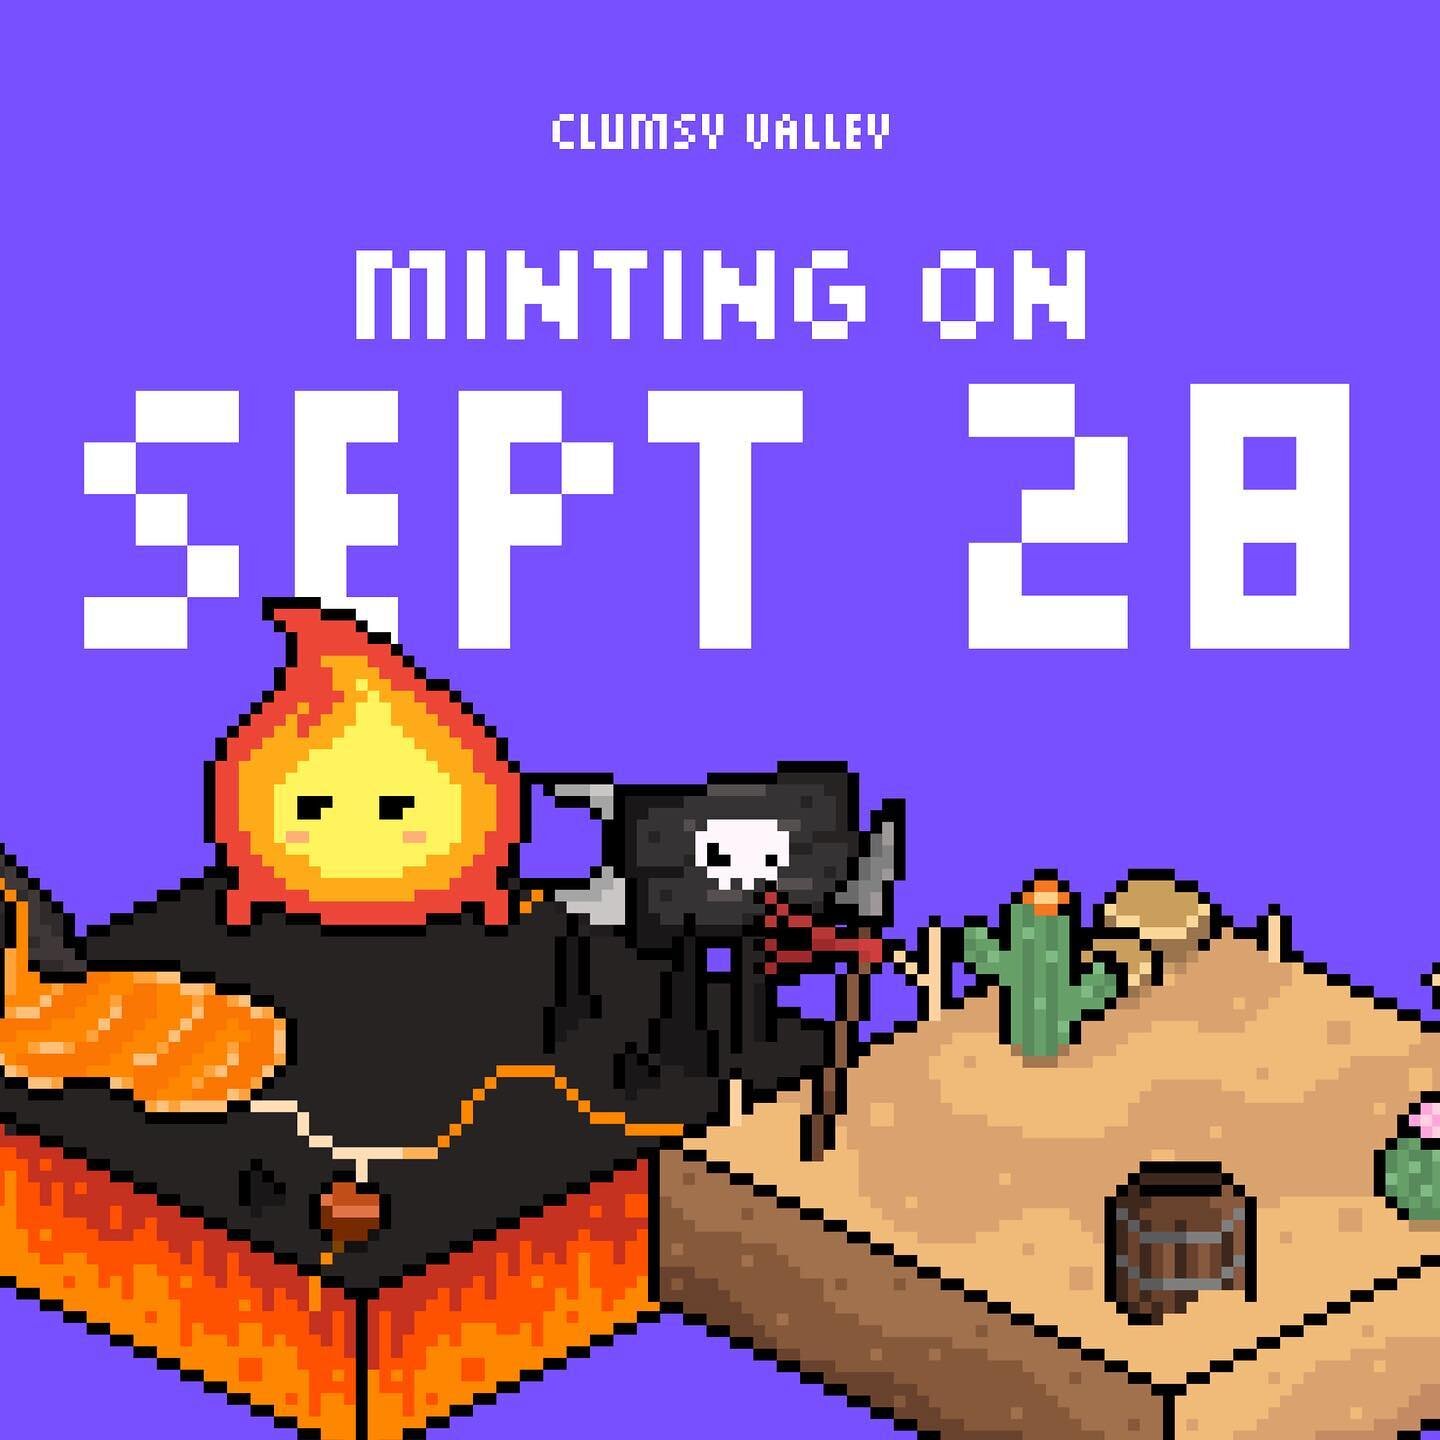 🚨 Clumsy Valley Mint 🚨 

Round 1 - September 28th @ 2PM EST
This round is a 1 for 1 Whitelist mint for Clumsy Ghosts holders.

Round 2 - September 29th @ 2PM EST
Unlimited mint for Clumsy Ghosts holders

Round 3 - September 29th @ 6PM EST

Mint wil